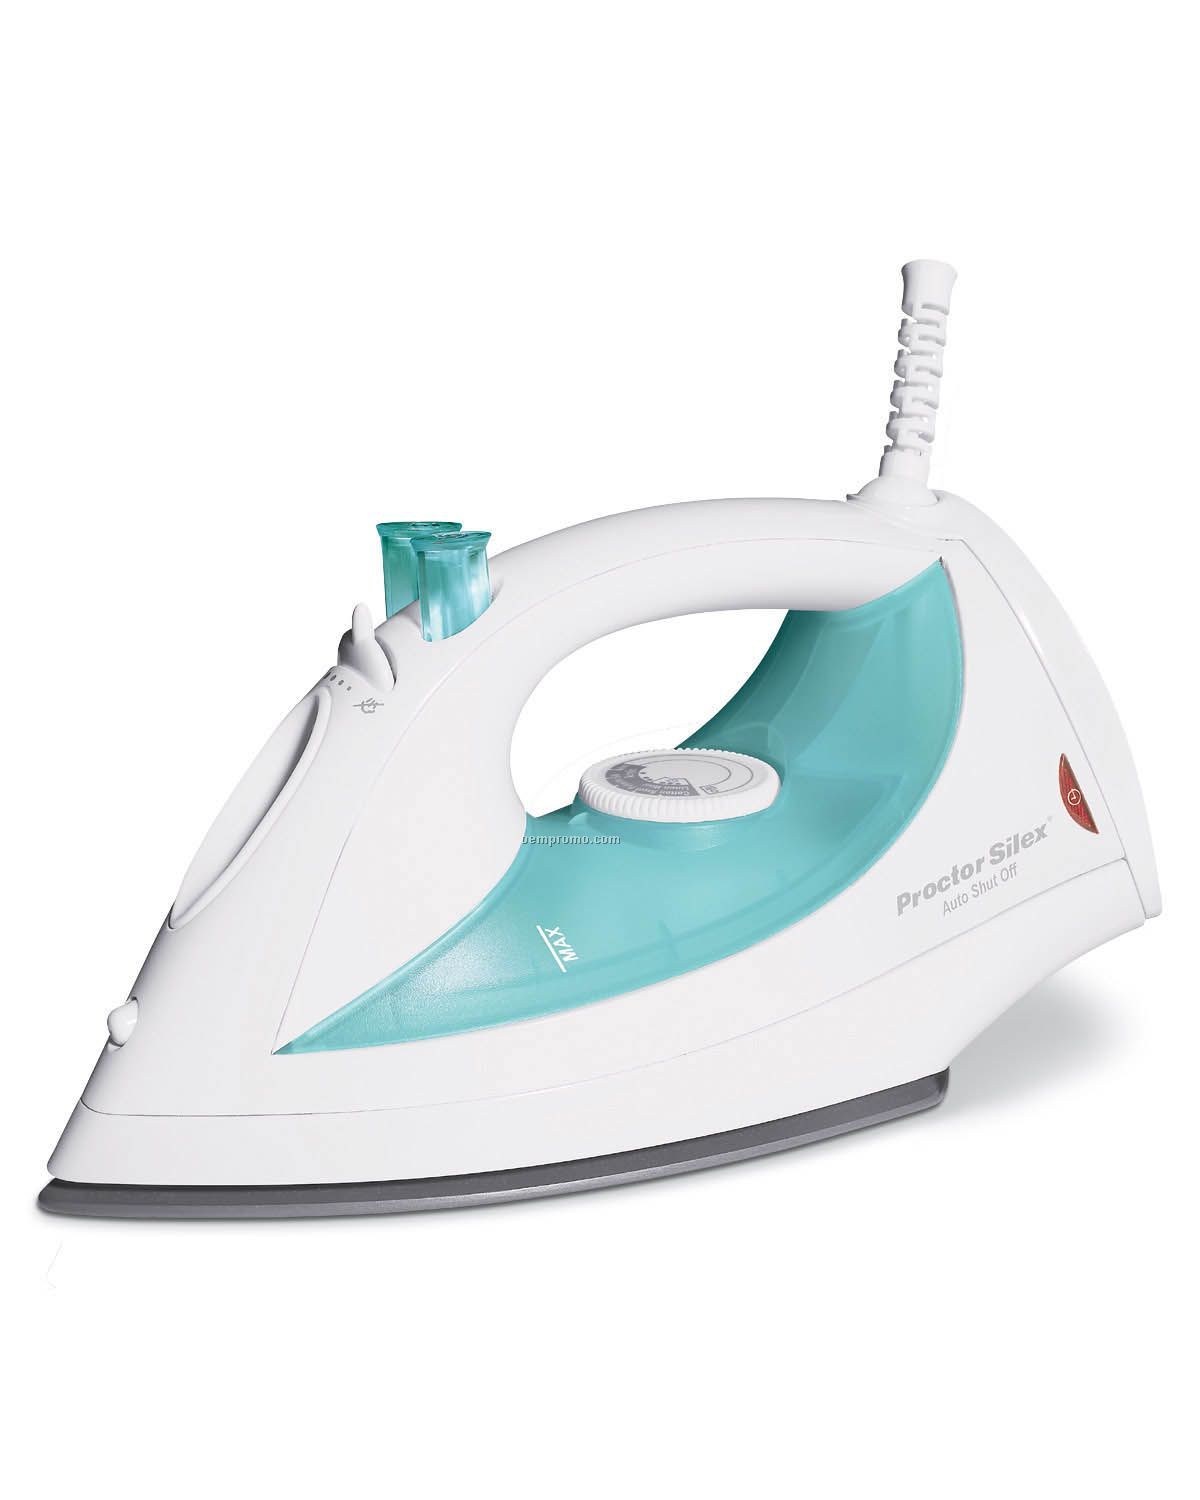 Proctor Silex Ps - Mid Sized Iron (White/Green)